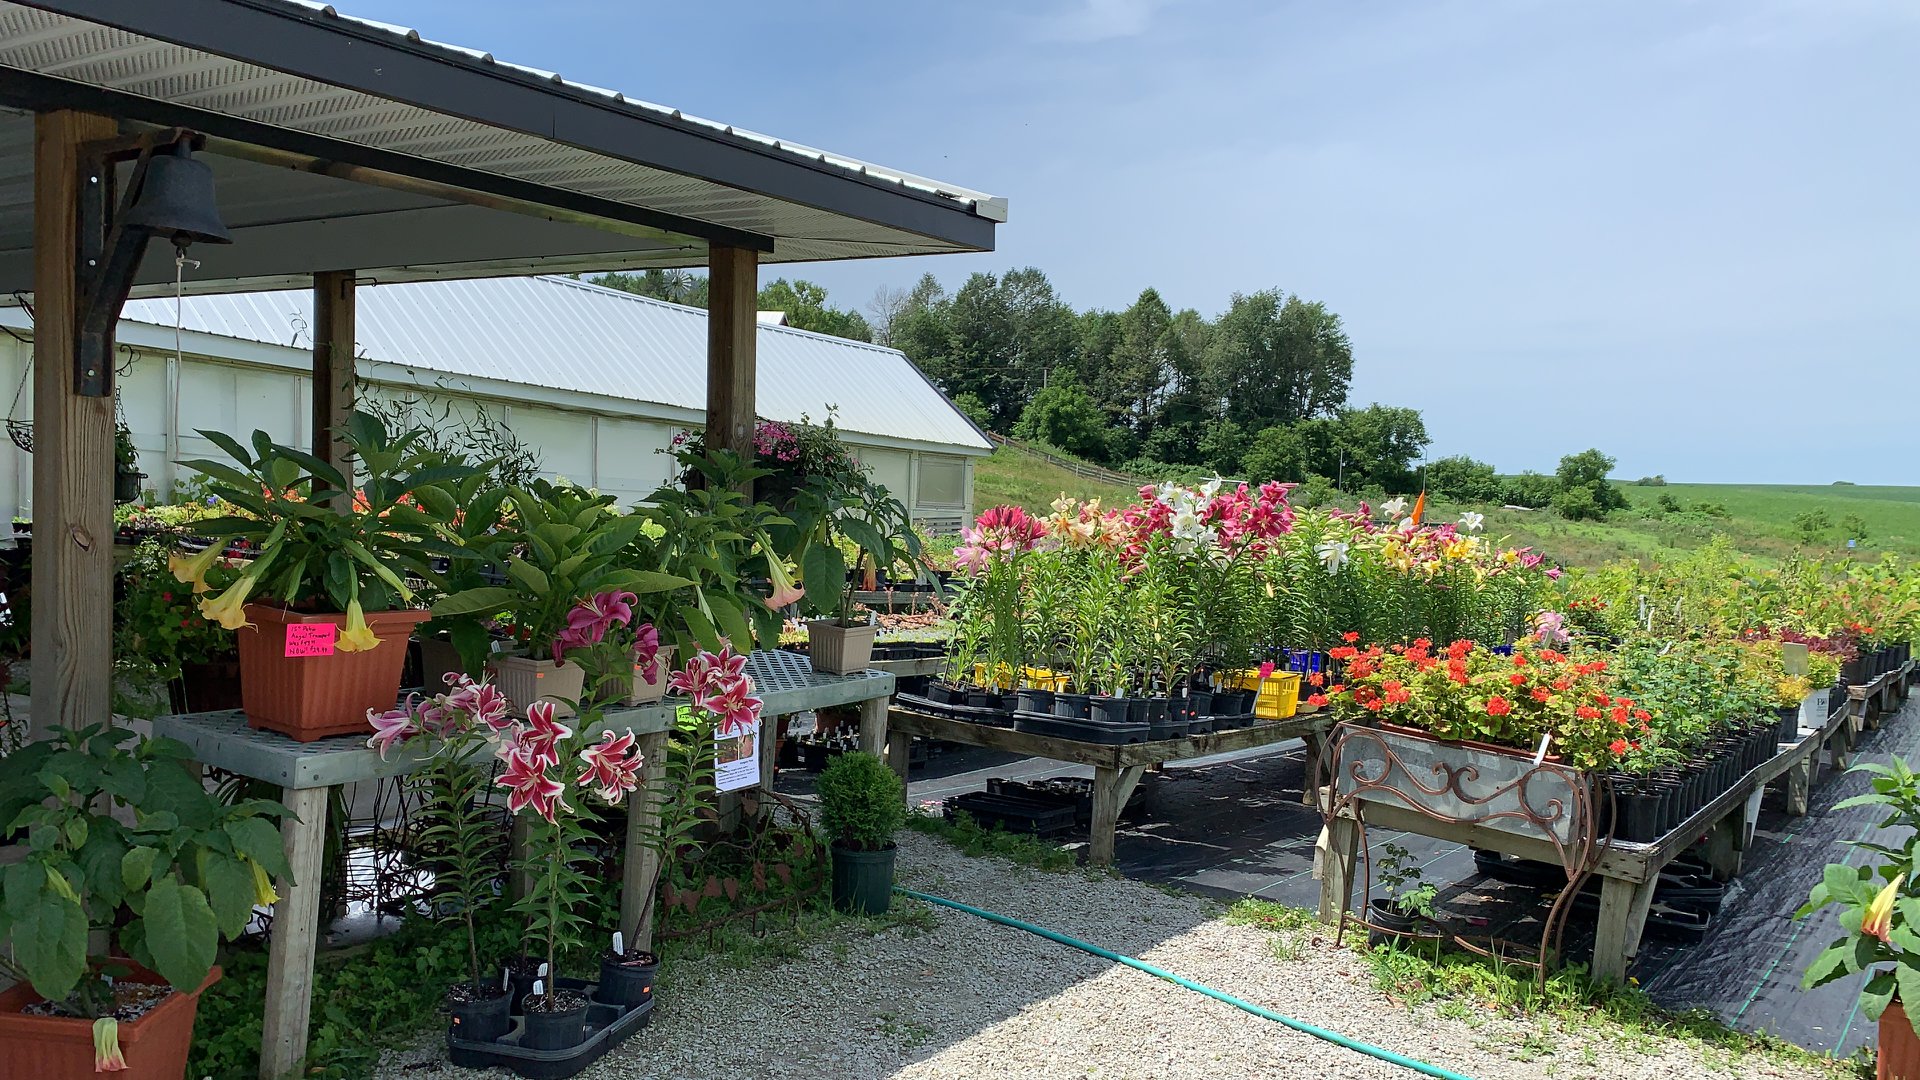 Market stand of flowers and plants